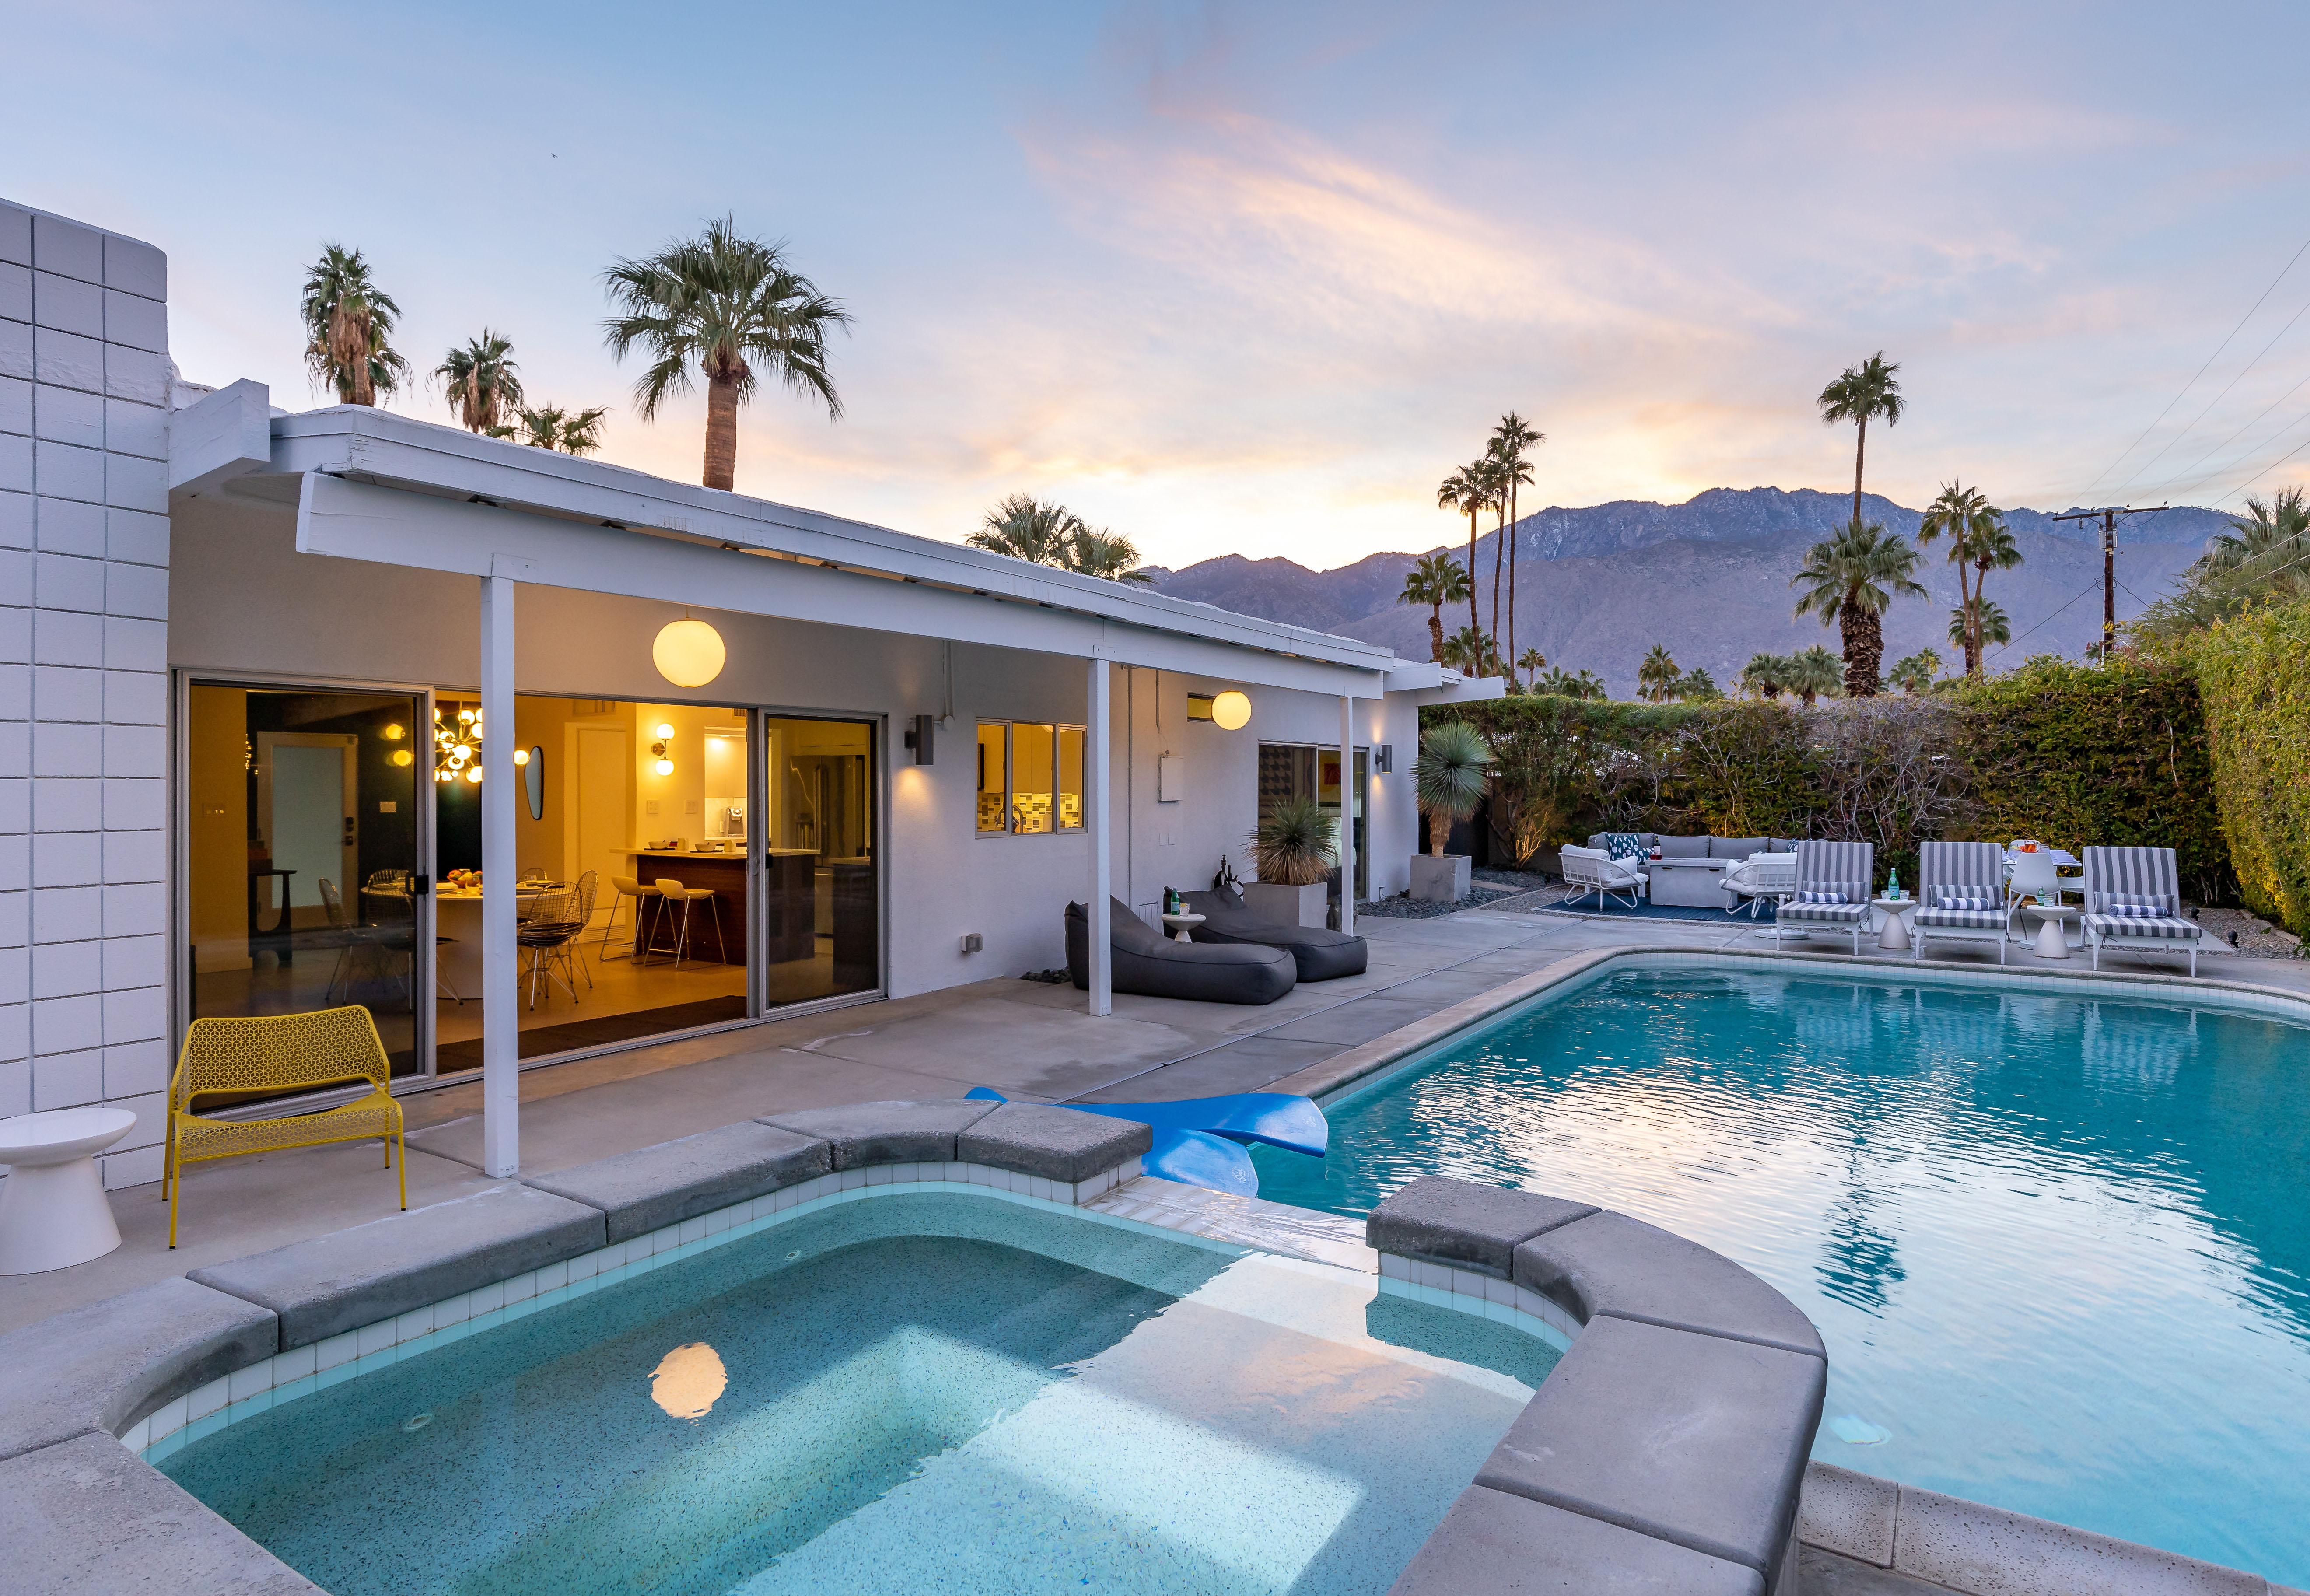 vacation rentals united states california palm springs images fav_touch_icons images fav_touch_icons vacation rentals united states california palm springs